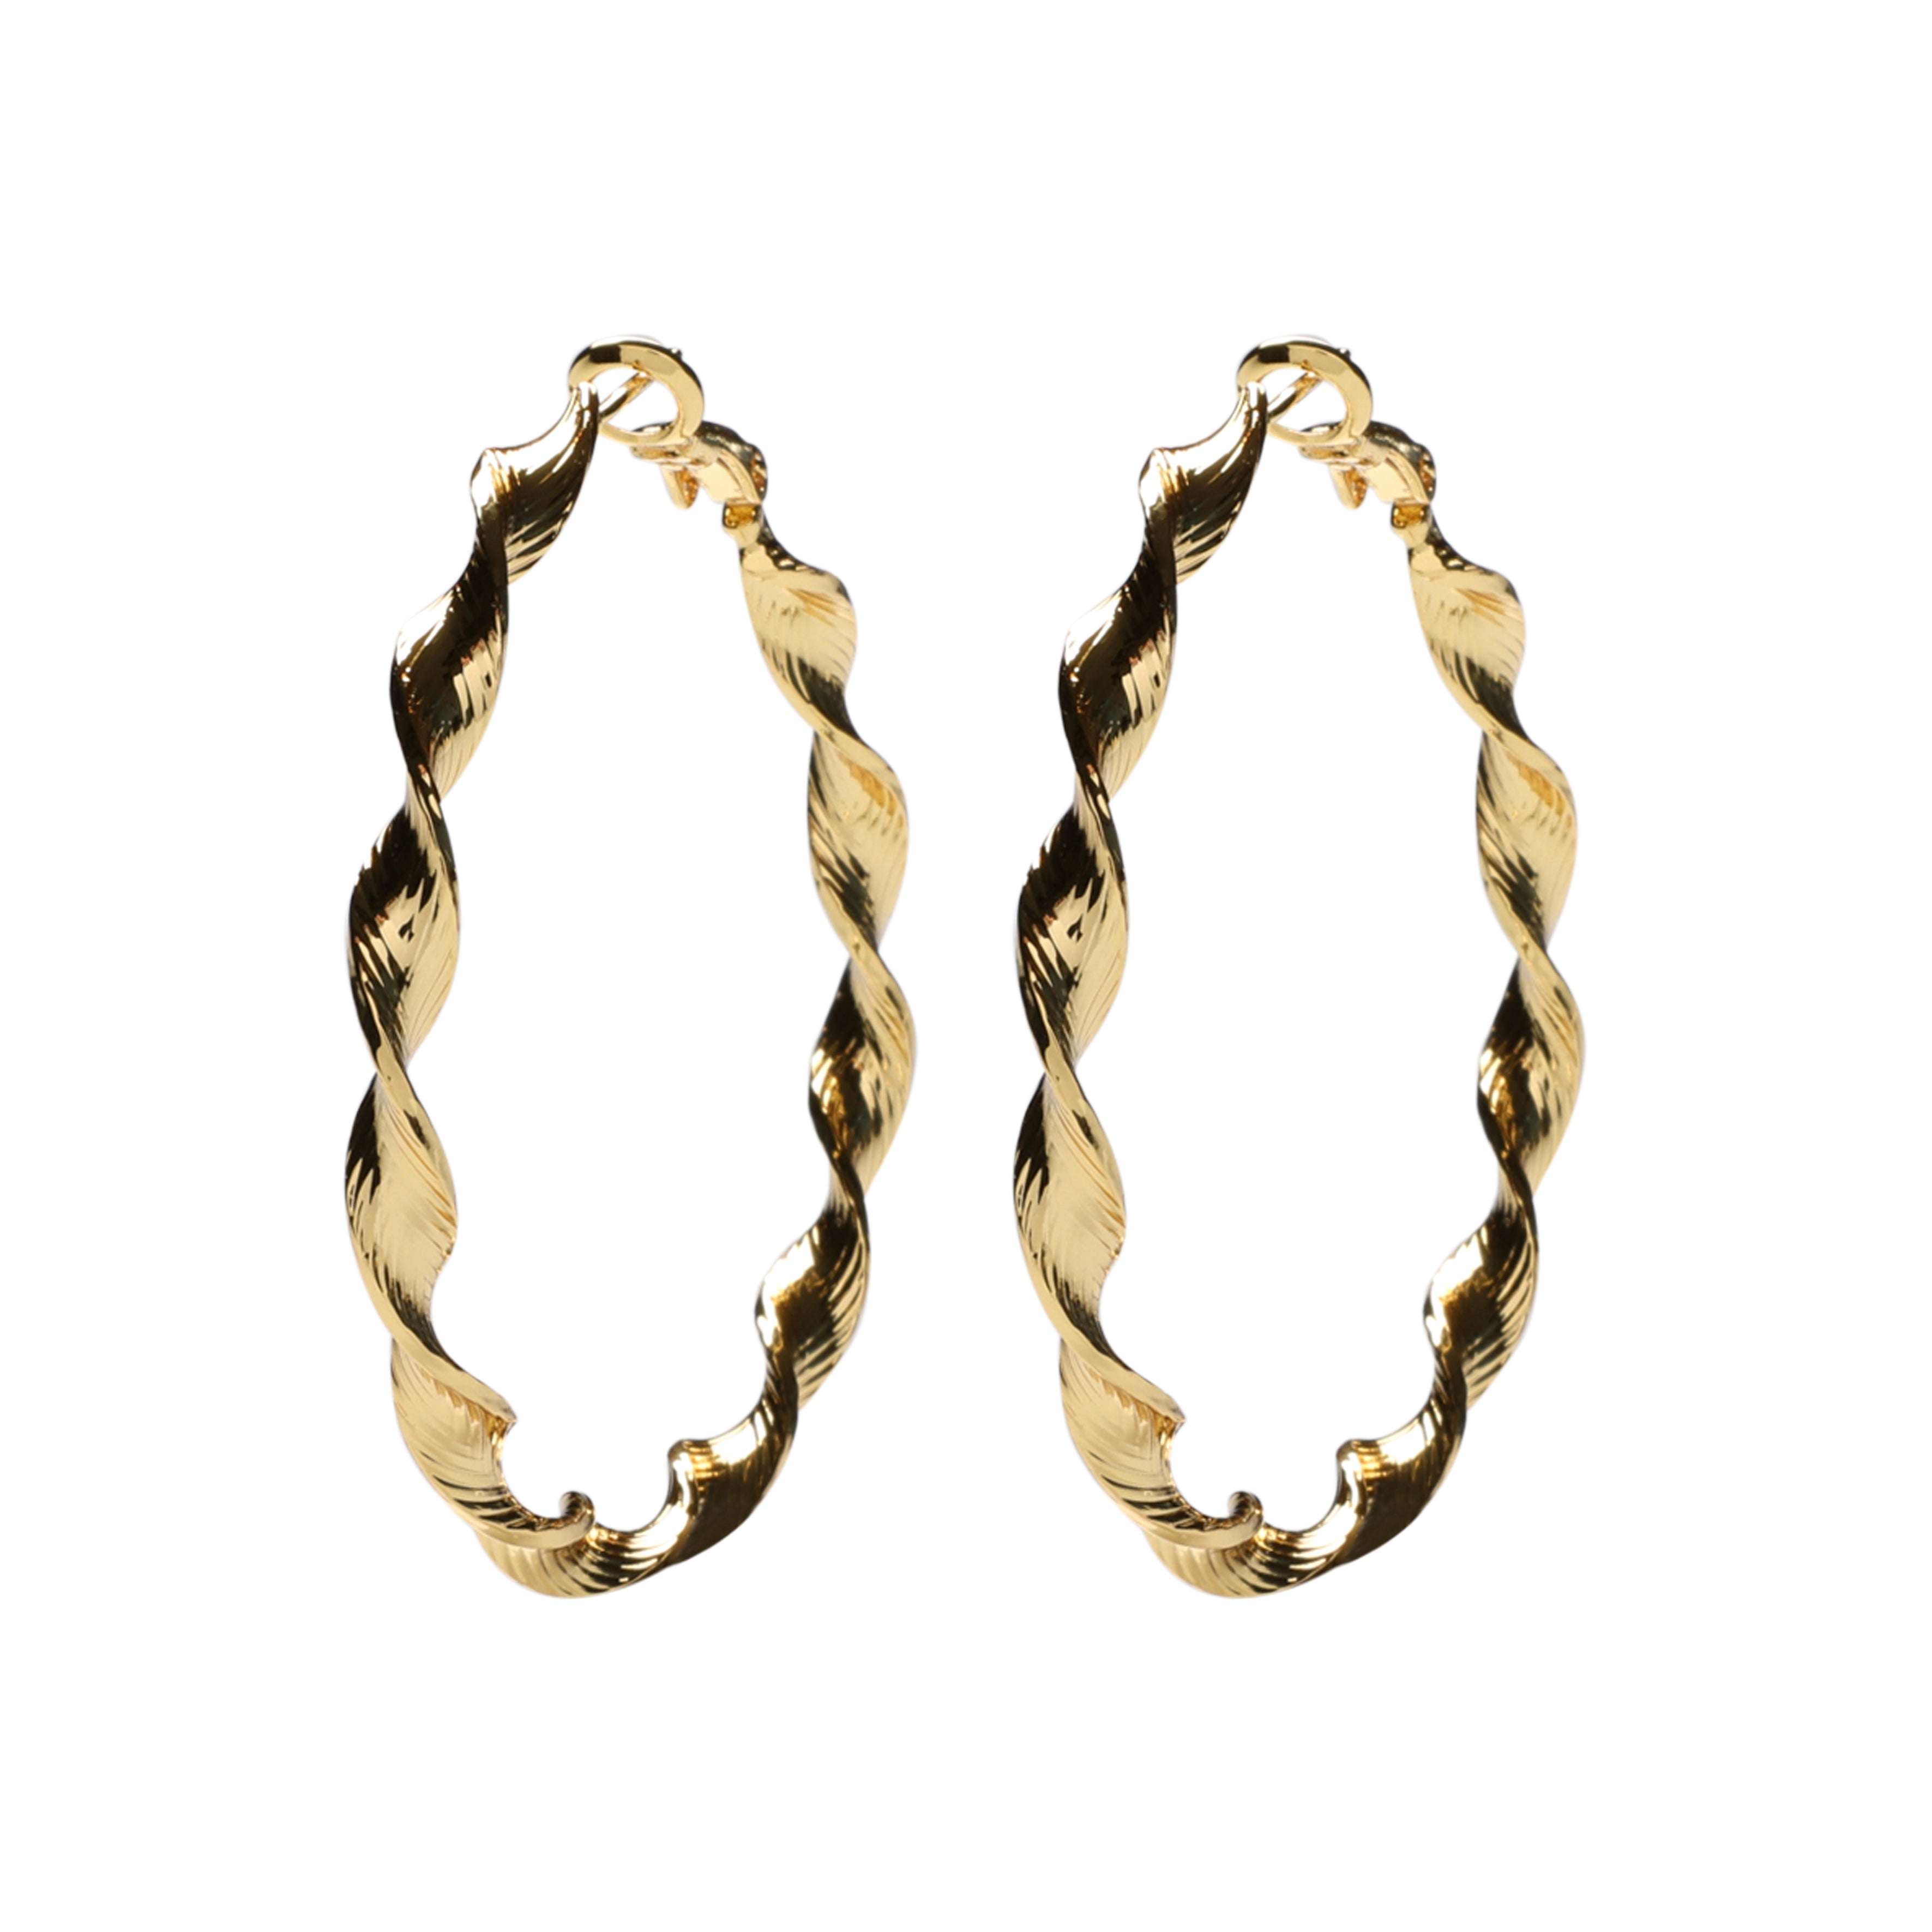 Twisted hoops - 50 mm, 18K gold-plated, 1 pair